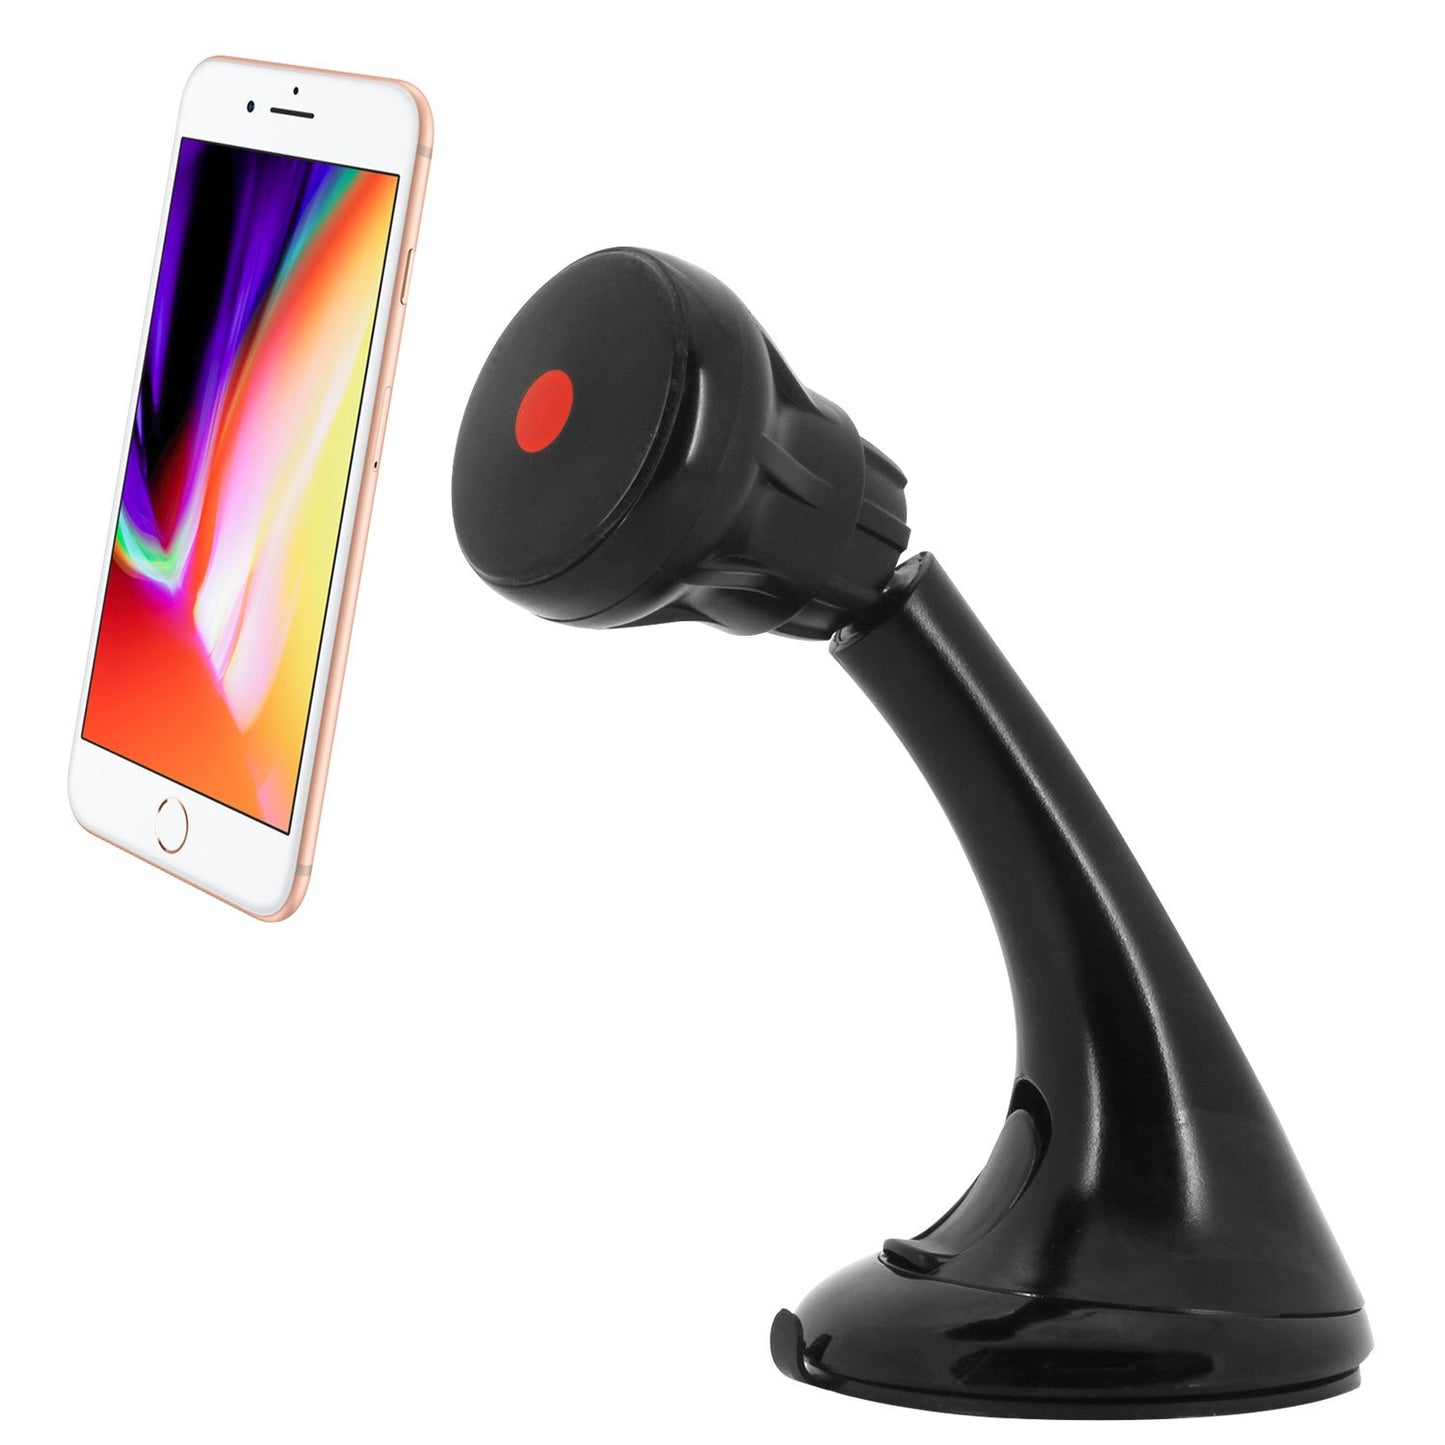 PHD23CN - Windshield/Dashboard Mount Phone Holder for iPhone 13 Pro Max and More - Extra Strength Suction Cup with Quick-Snap Technology